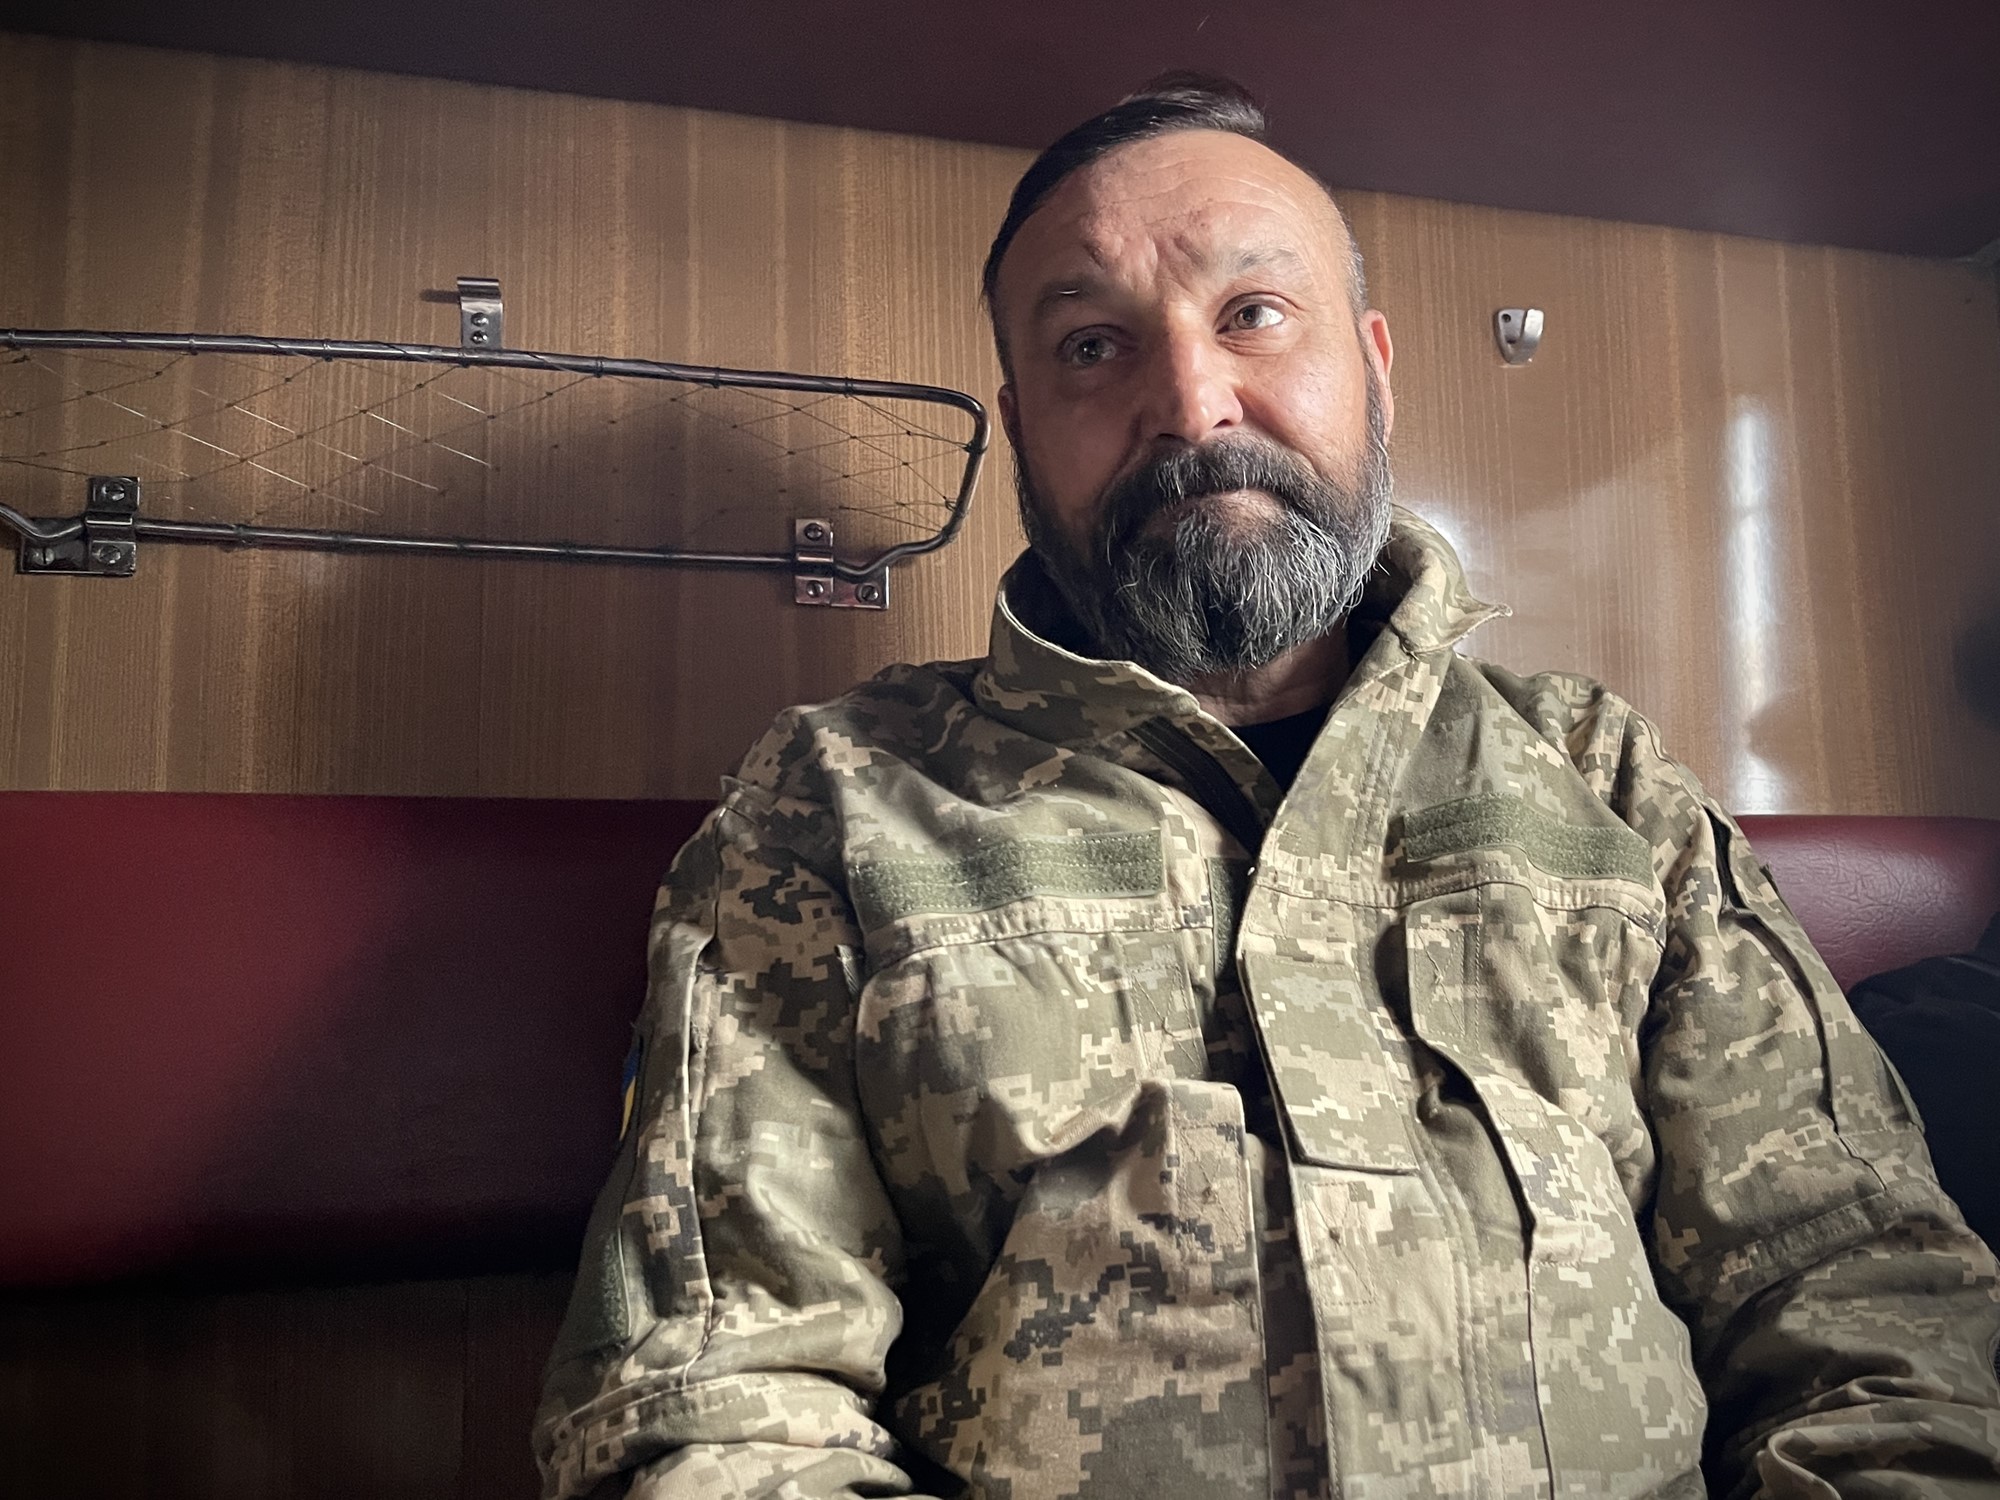 Sergei sits in his military uniform.